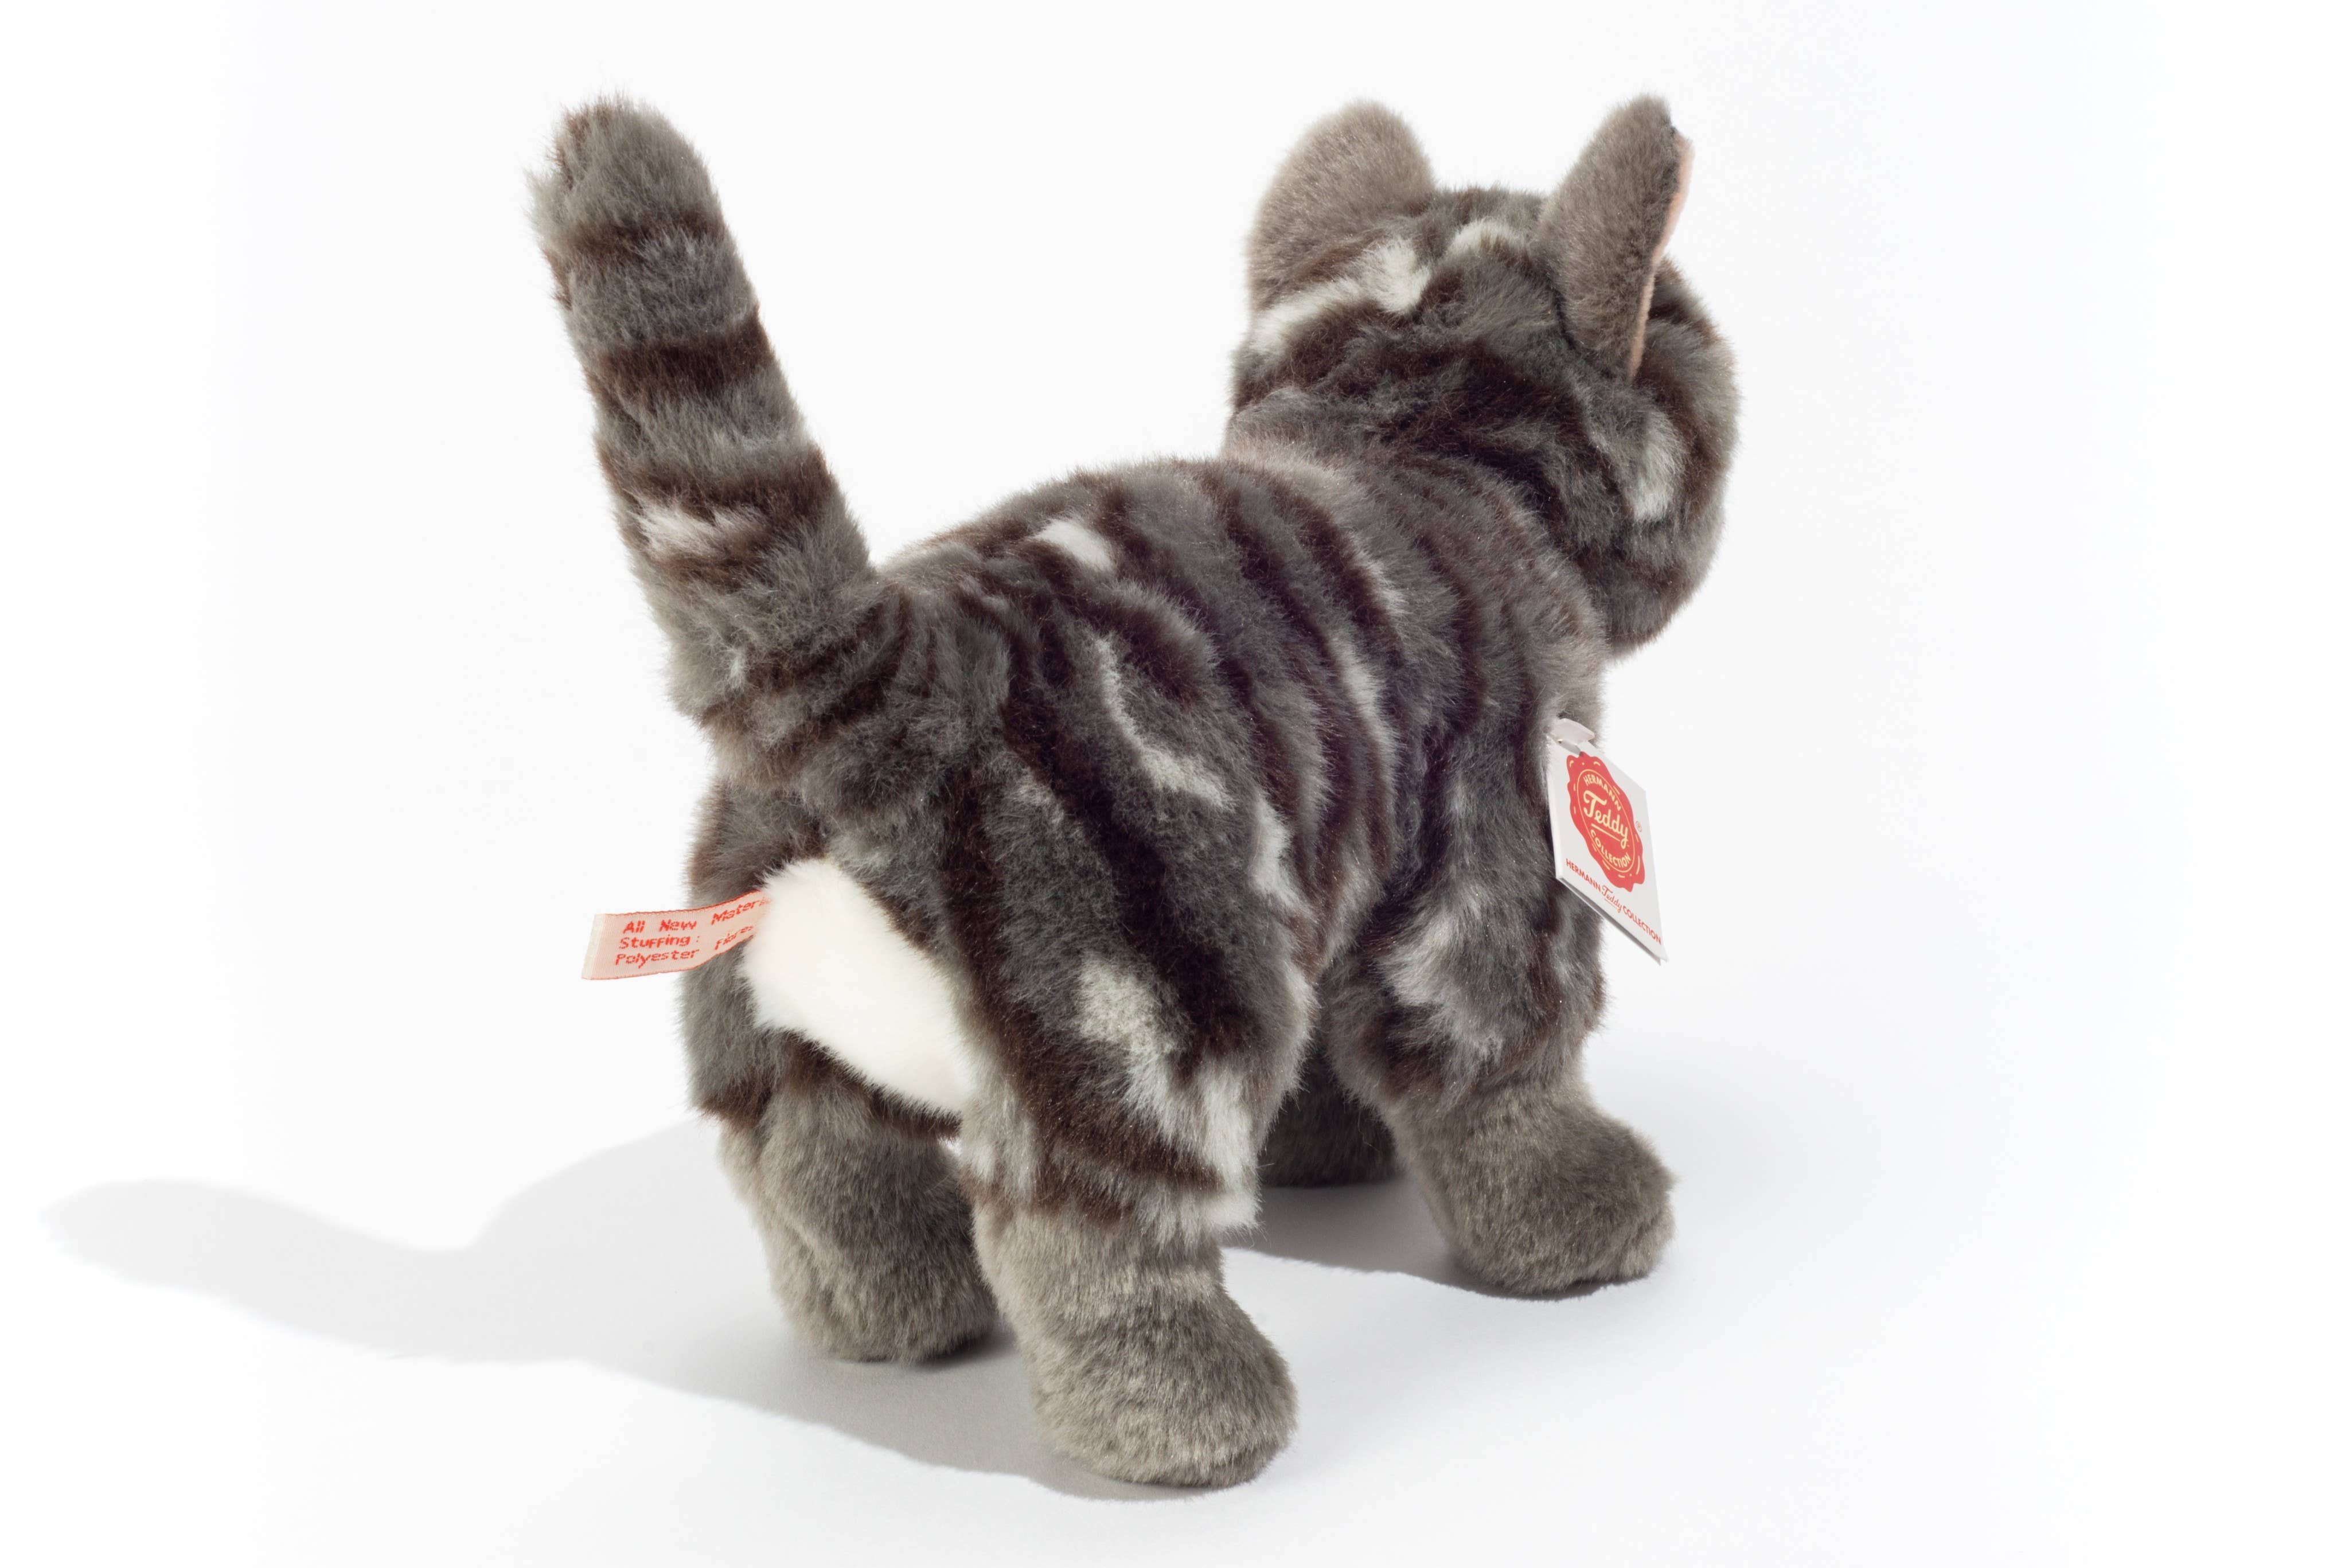 Plush Grey and White Tabby Kitty Cat 20 cm - plush soft toy by Teddy Hermann-standing